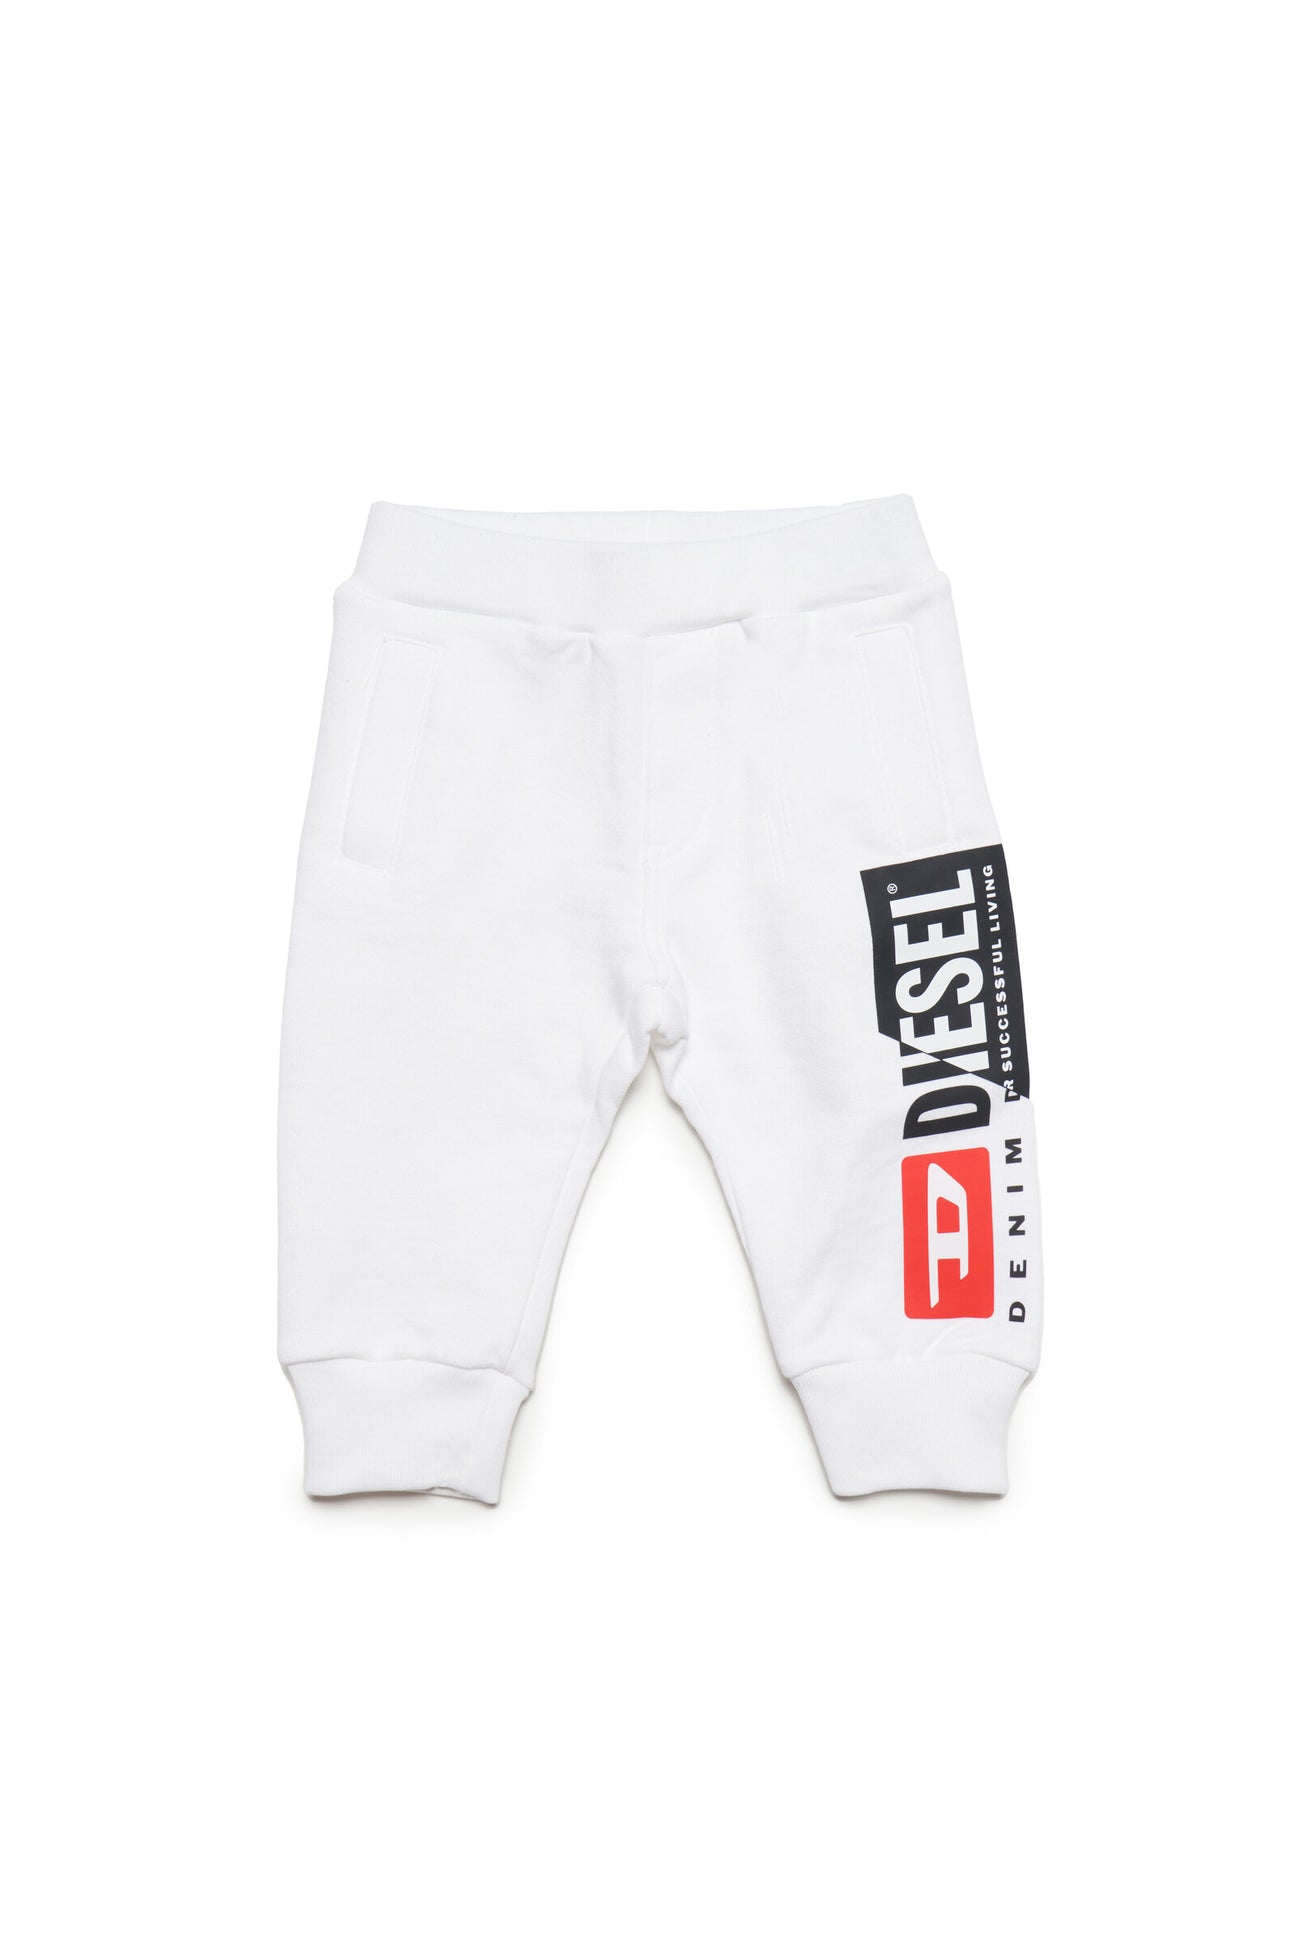 White jogger pants with Diesel double logo and back pocket 